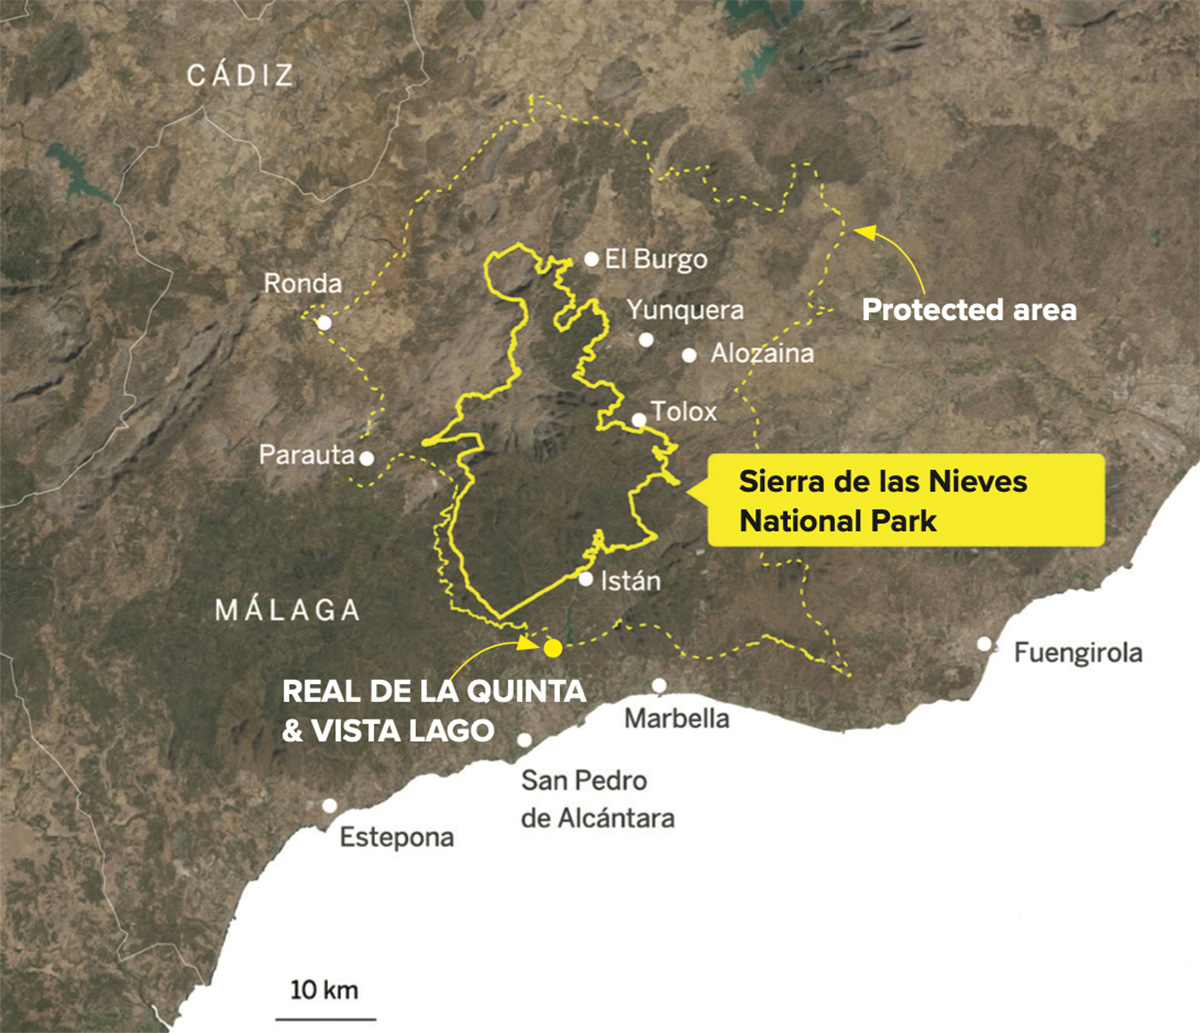 Locatioin maps of The Sierra de las Nieves National Park and protected area, close to Vista Lago